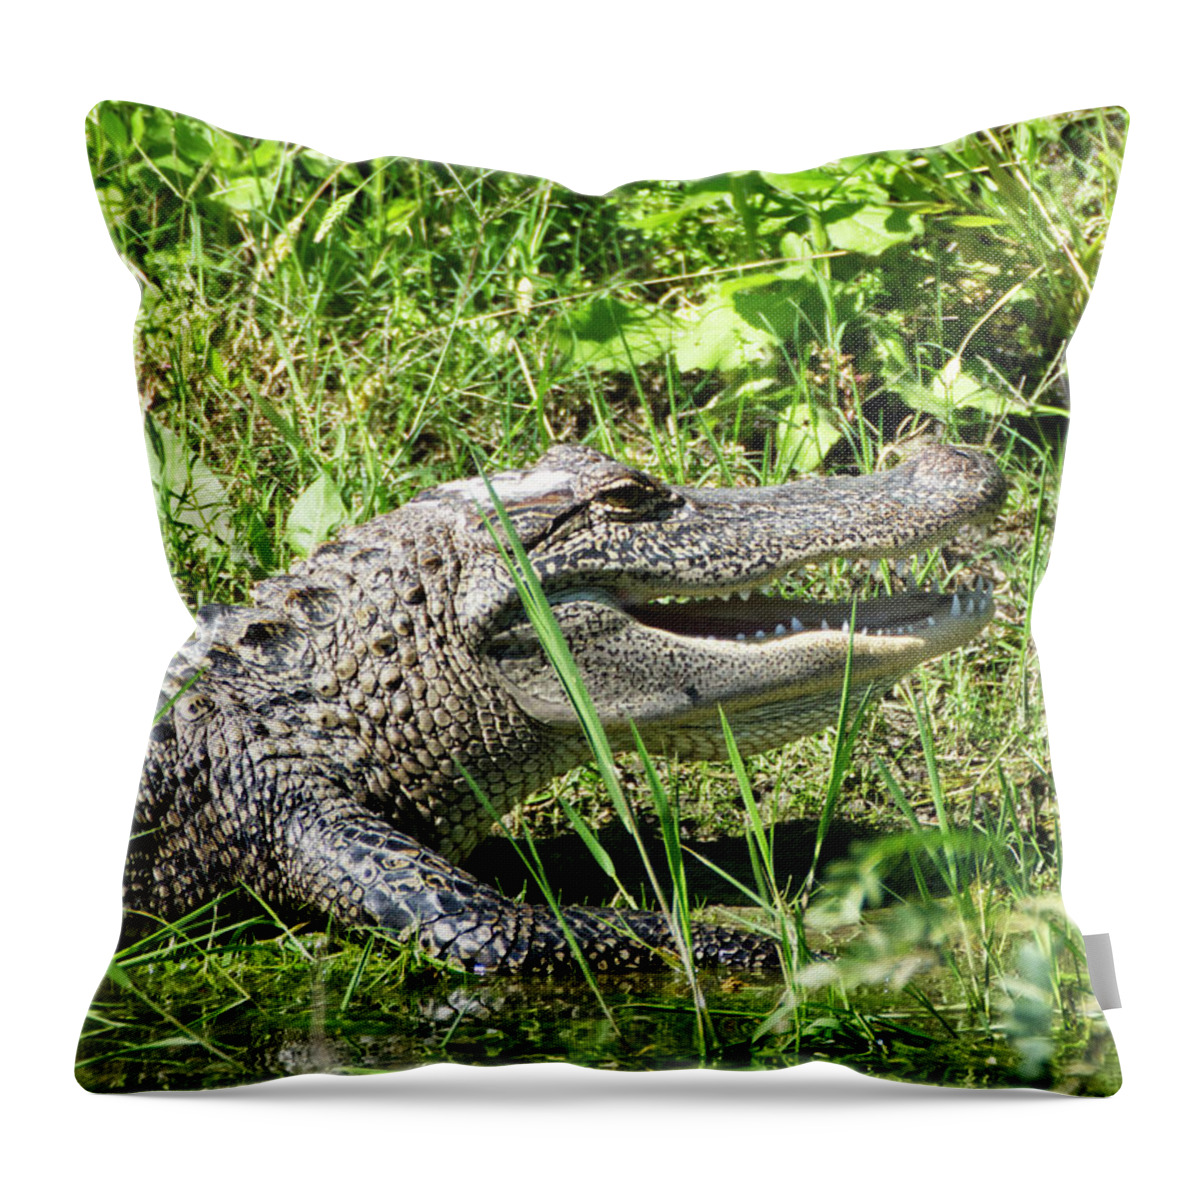 Alligator Throw Pillow featuring the photograph Alligator Grin by Ty Husak